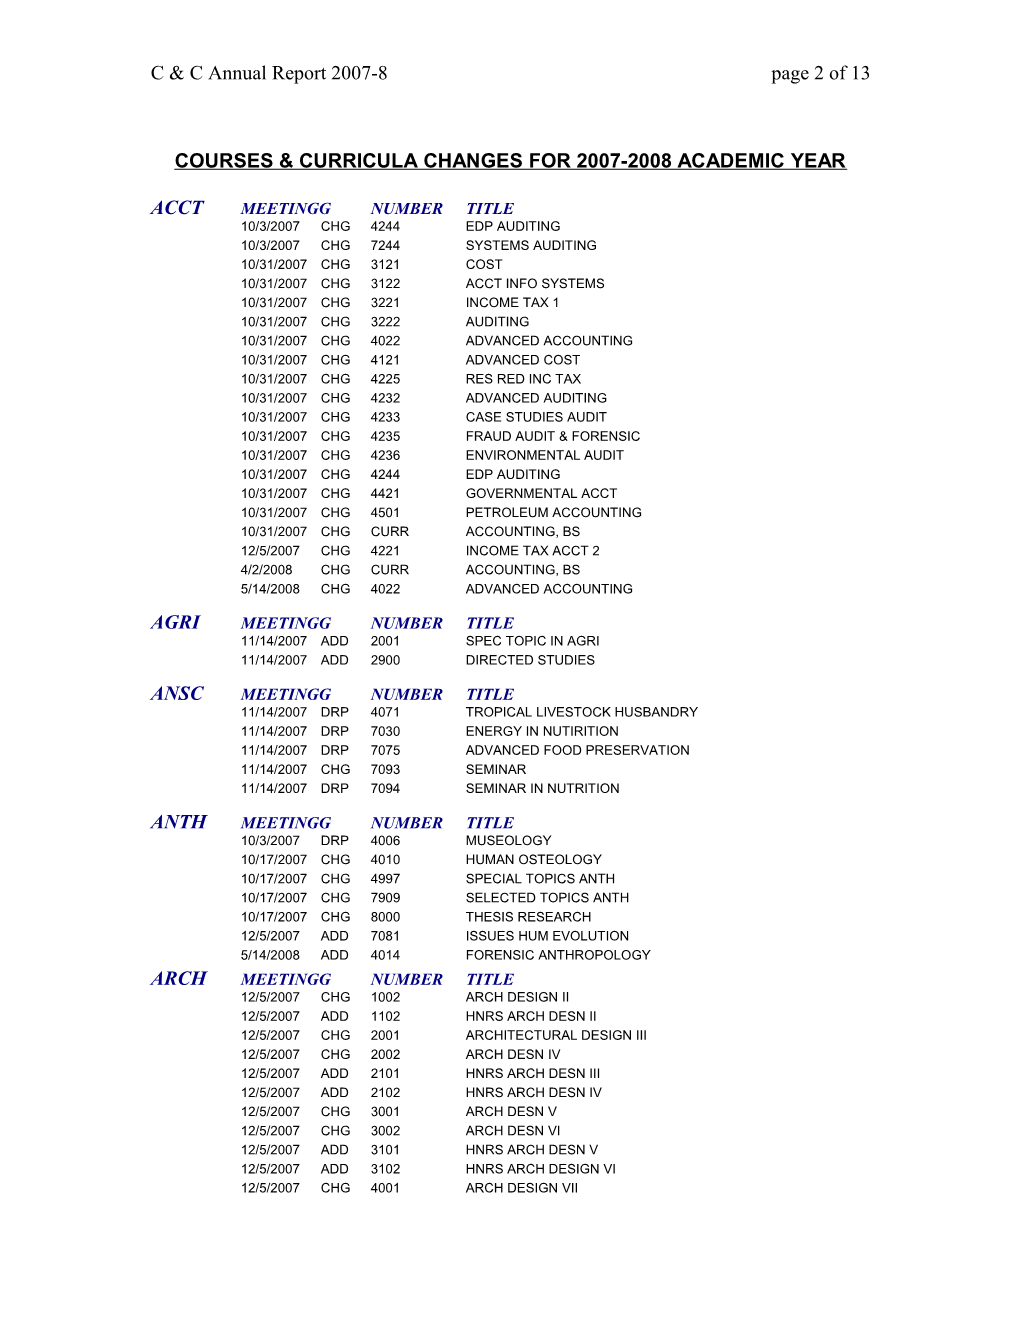 Courses and Curricula Actions Since January 2006